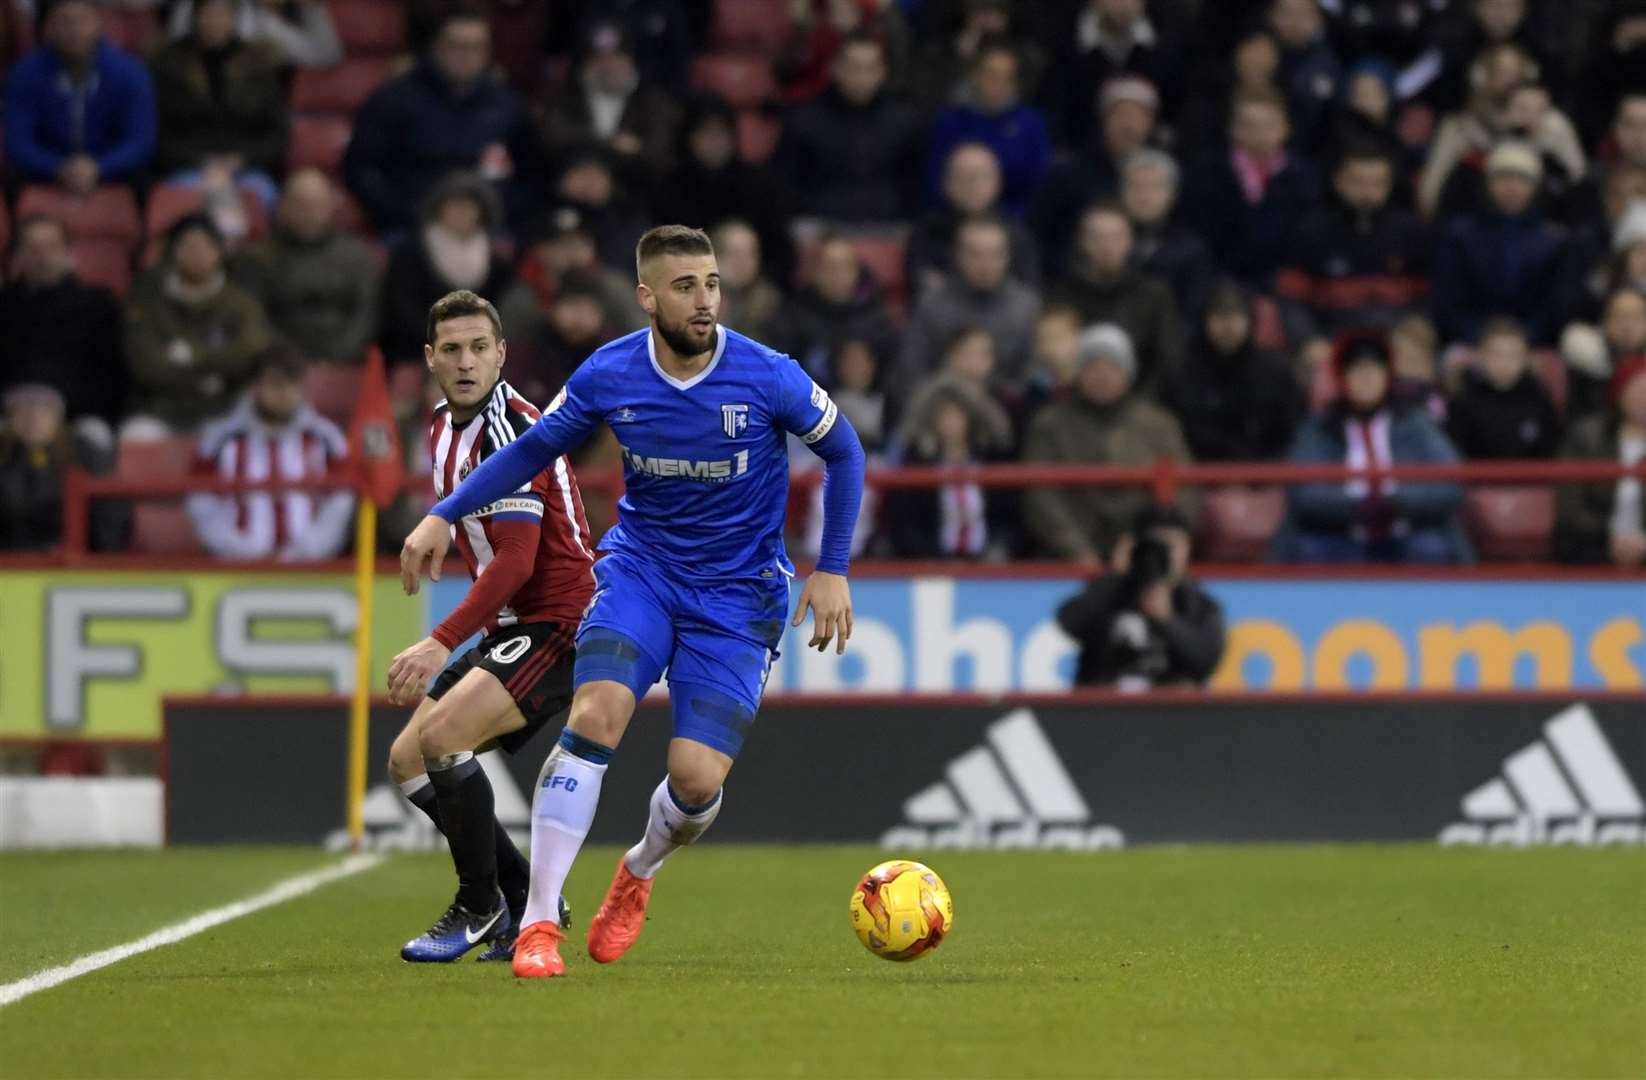 Max Ehmer pushes forward in a match against Sheffield Utd at Bramall Lane Picture: Barry Goodwin